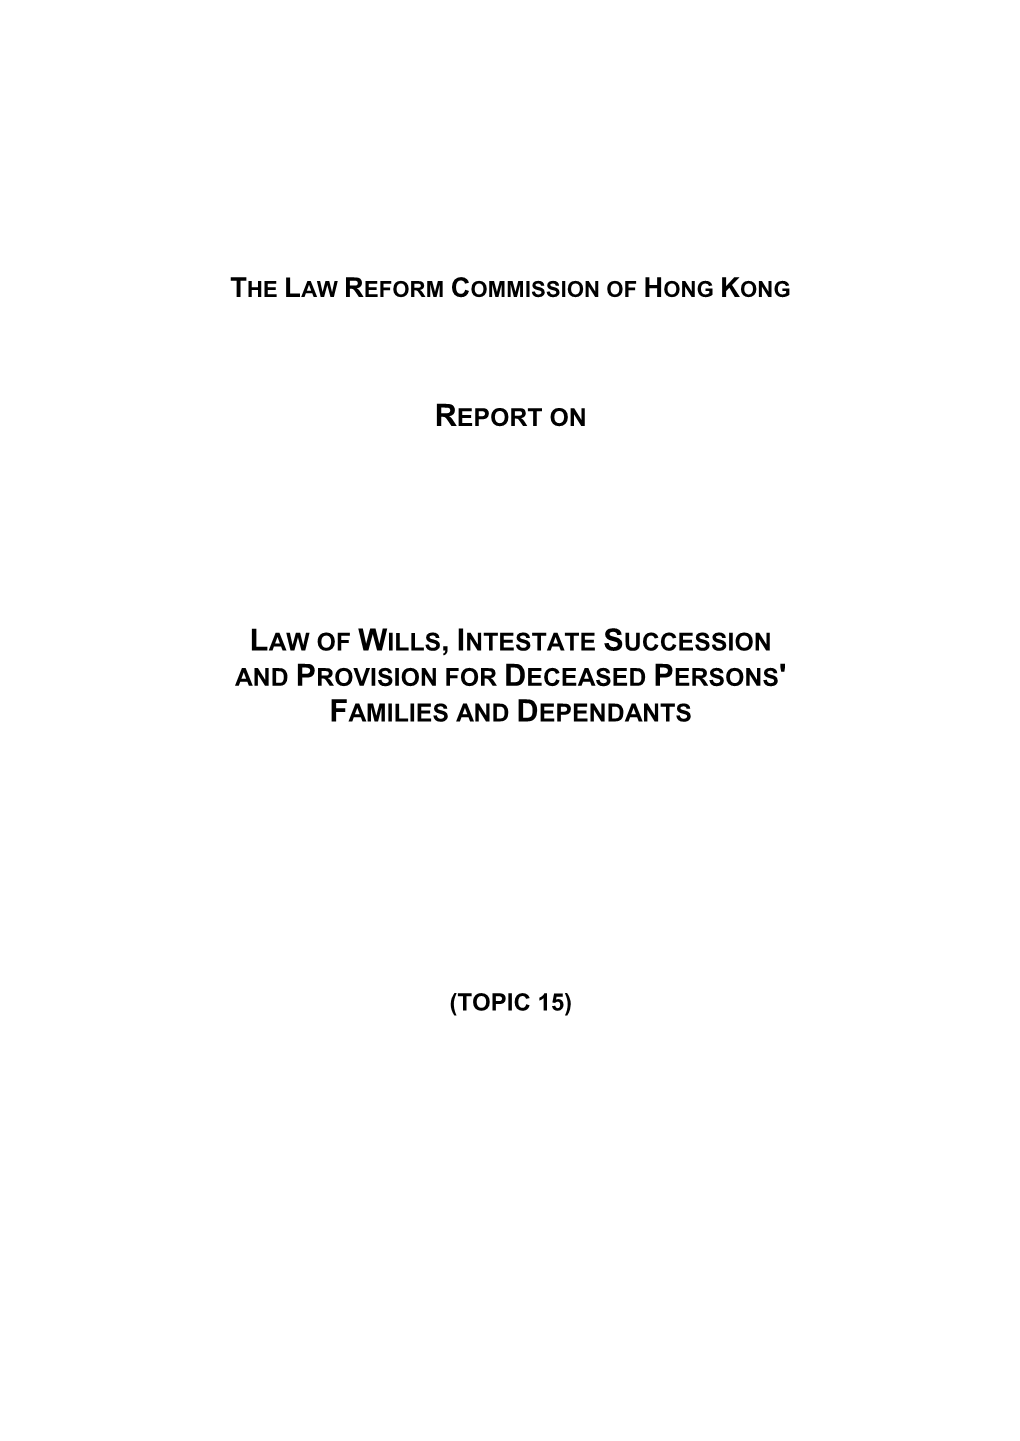 Report on Law of Wills, Intestate Succession and Provision for Deceased Persons' Families and Dependants